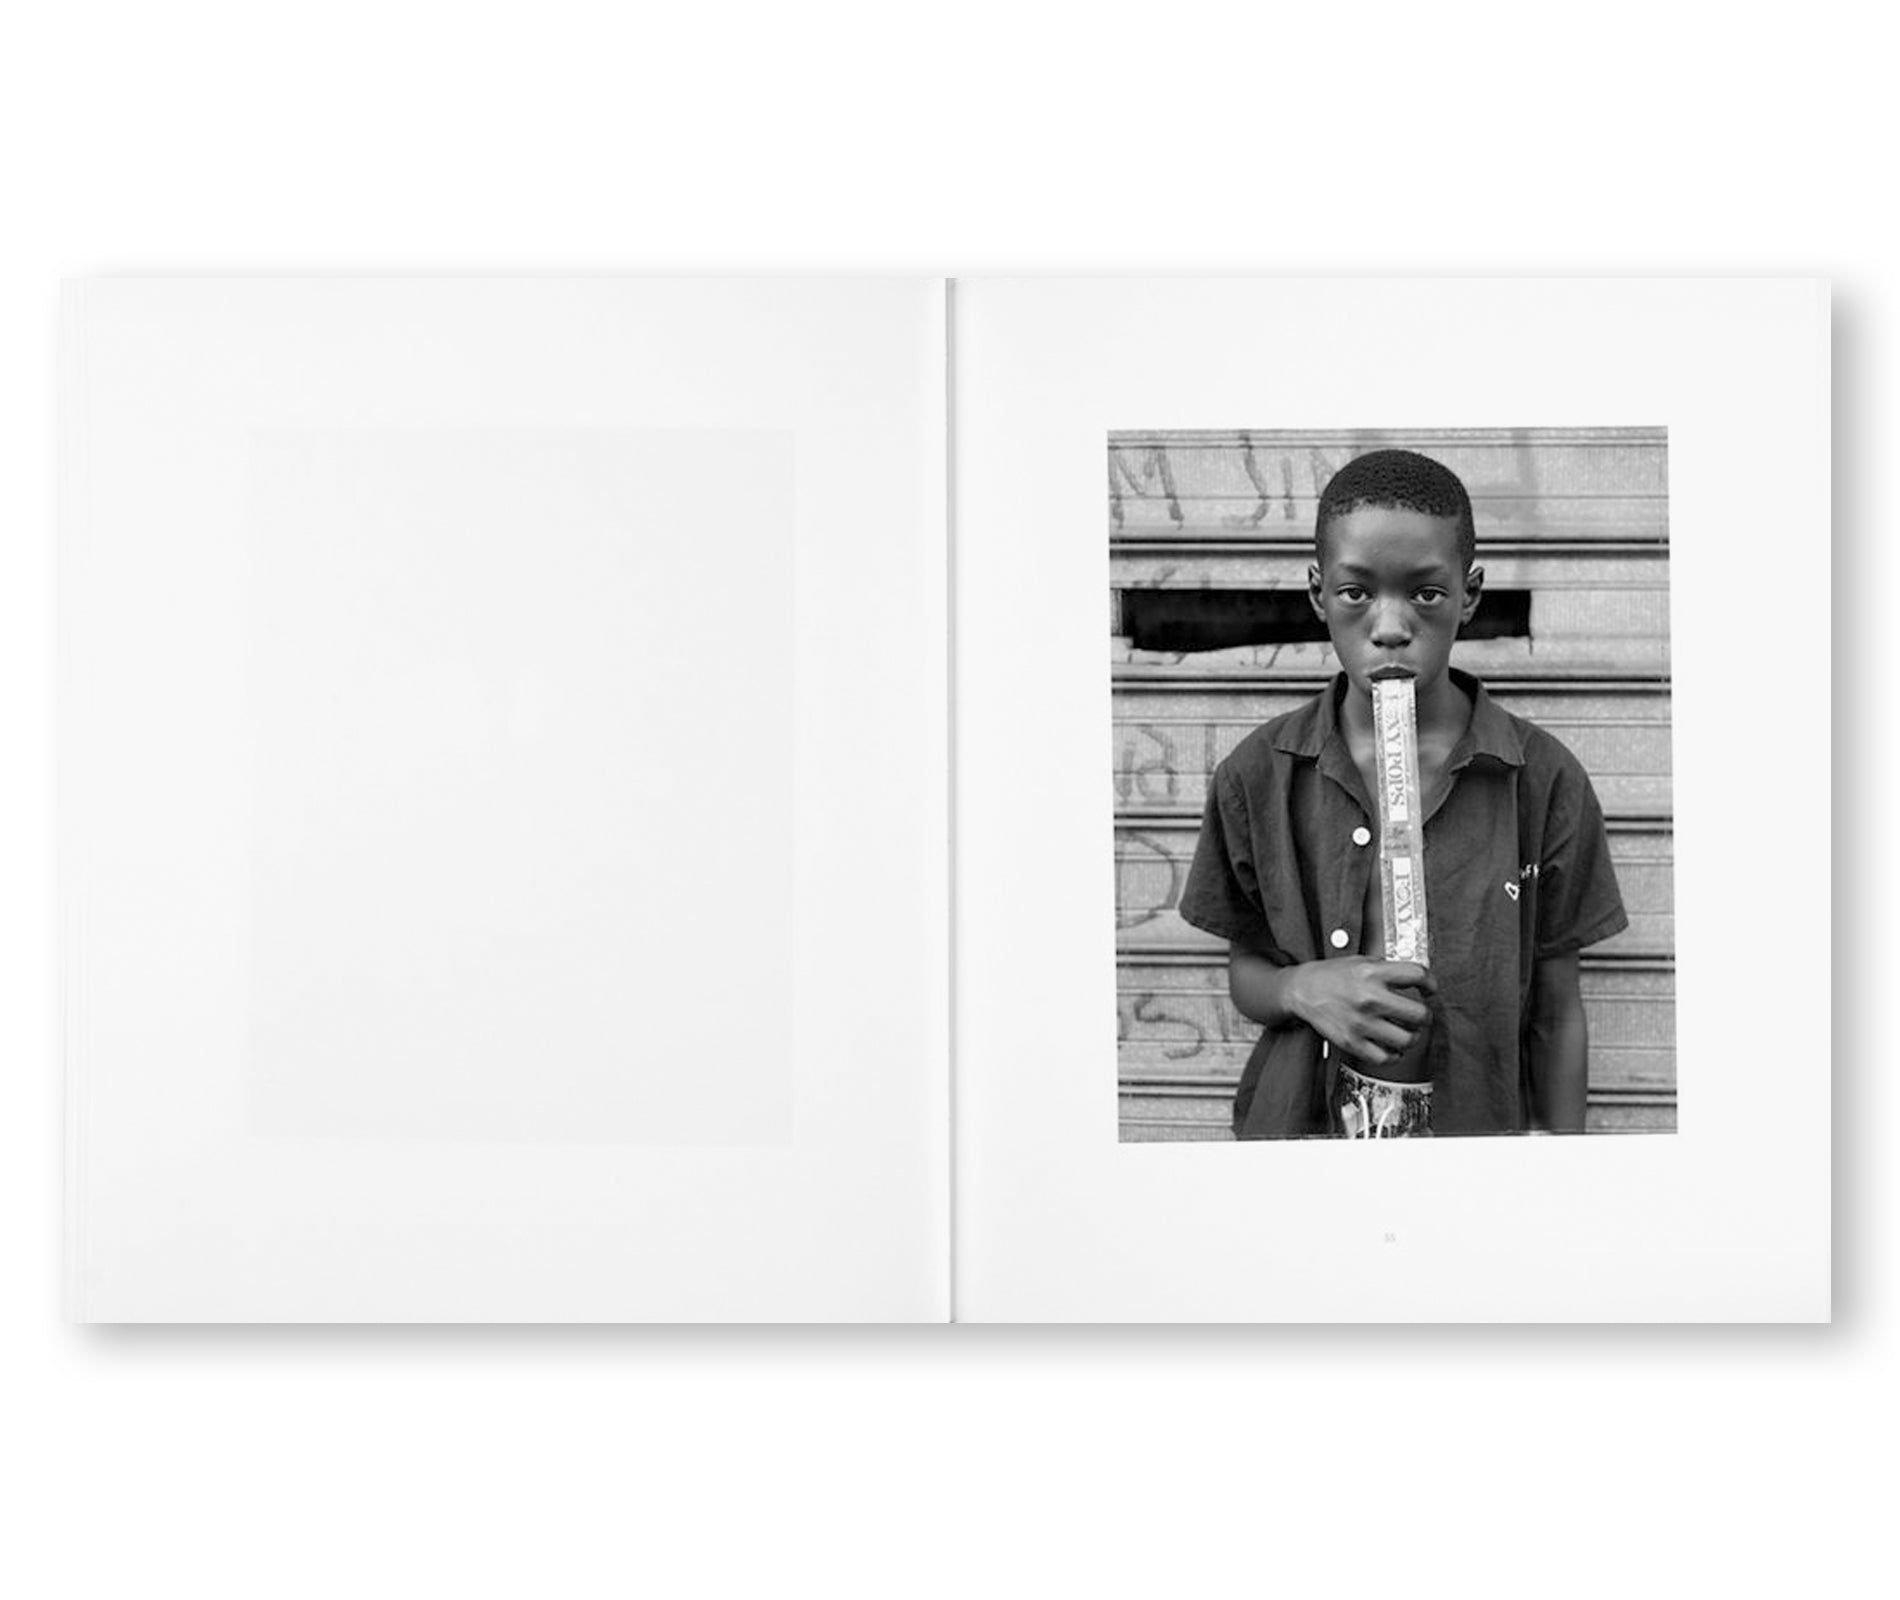 STREET PORTRAITS by Dawoud Bey [SIGNED]